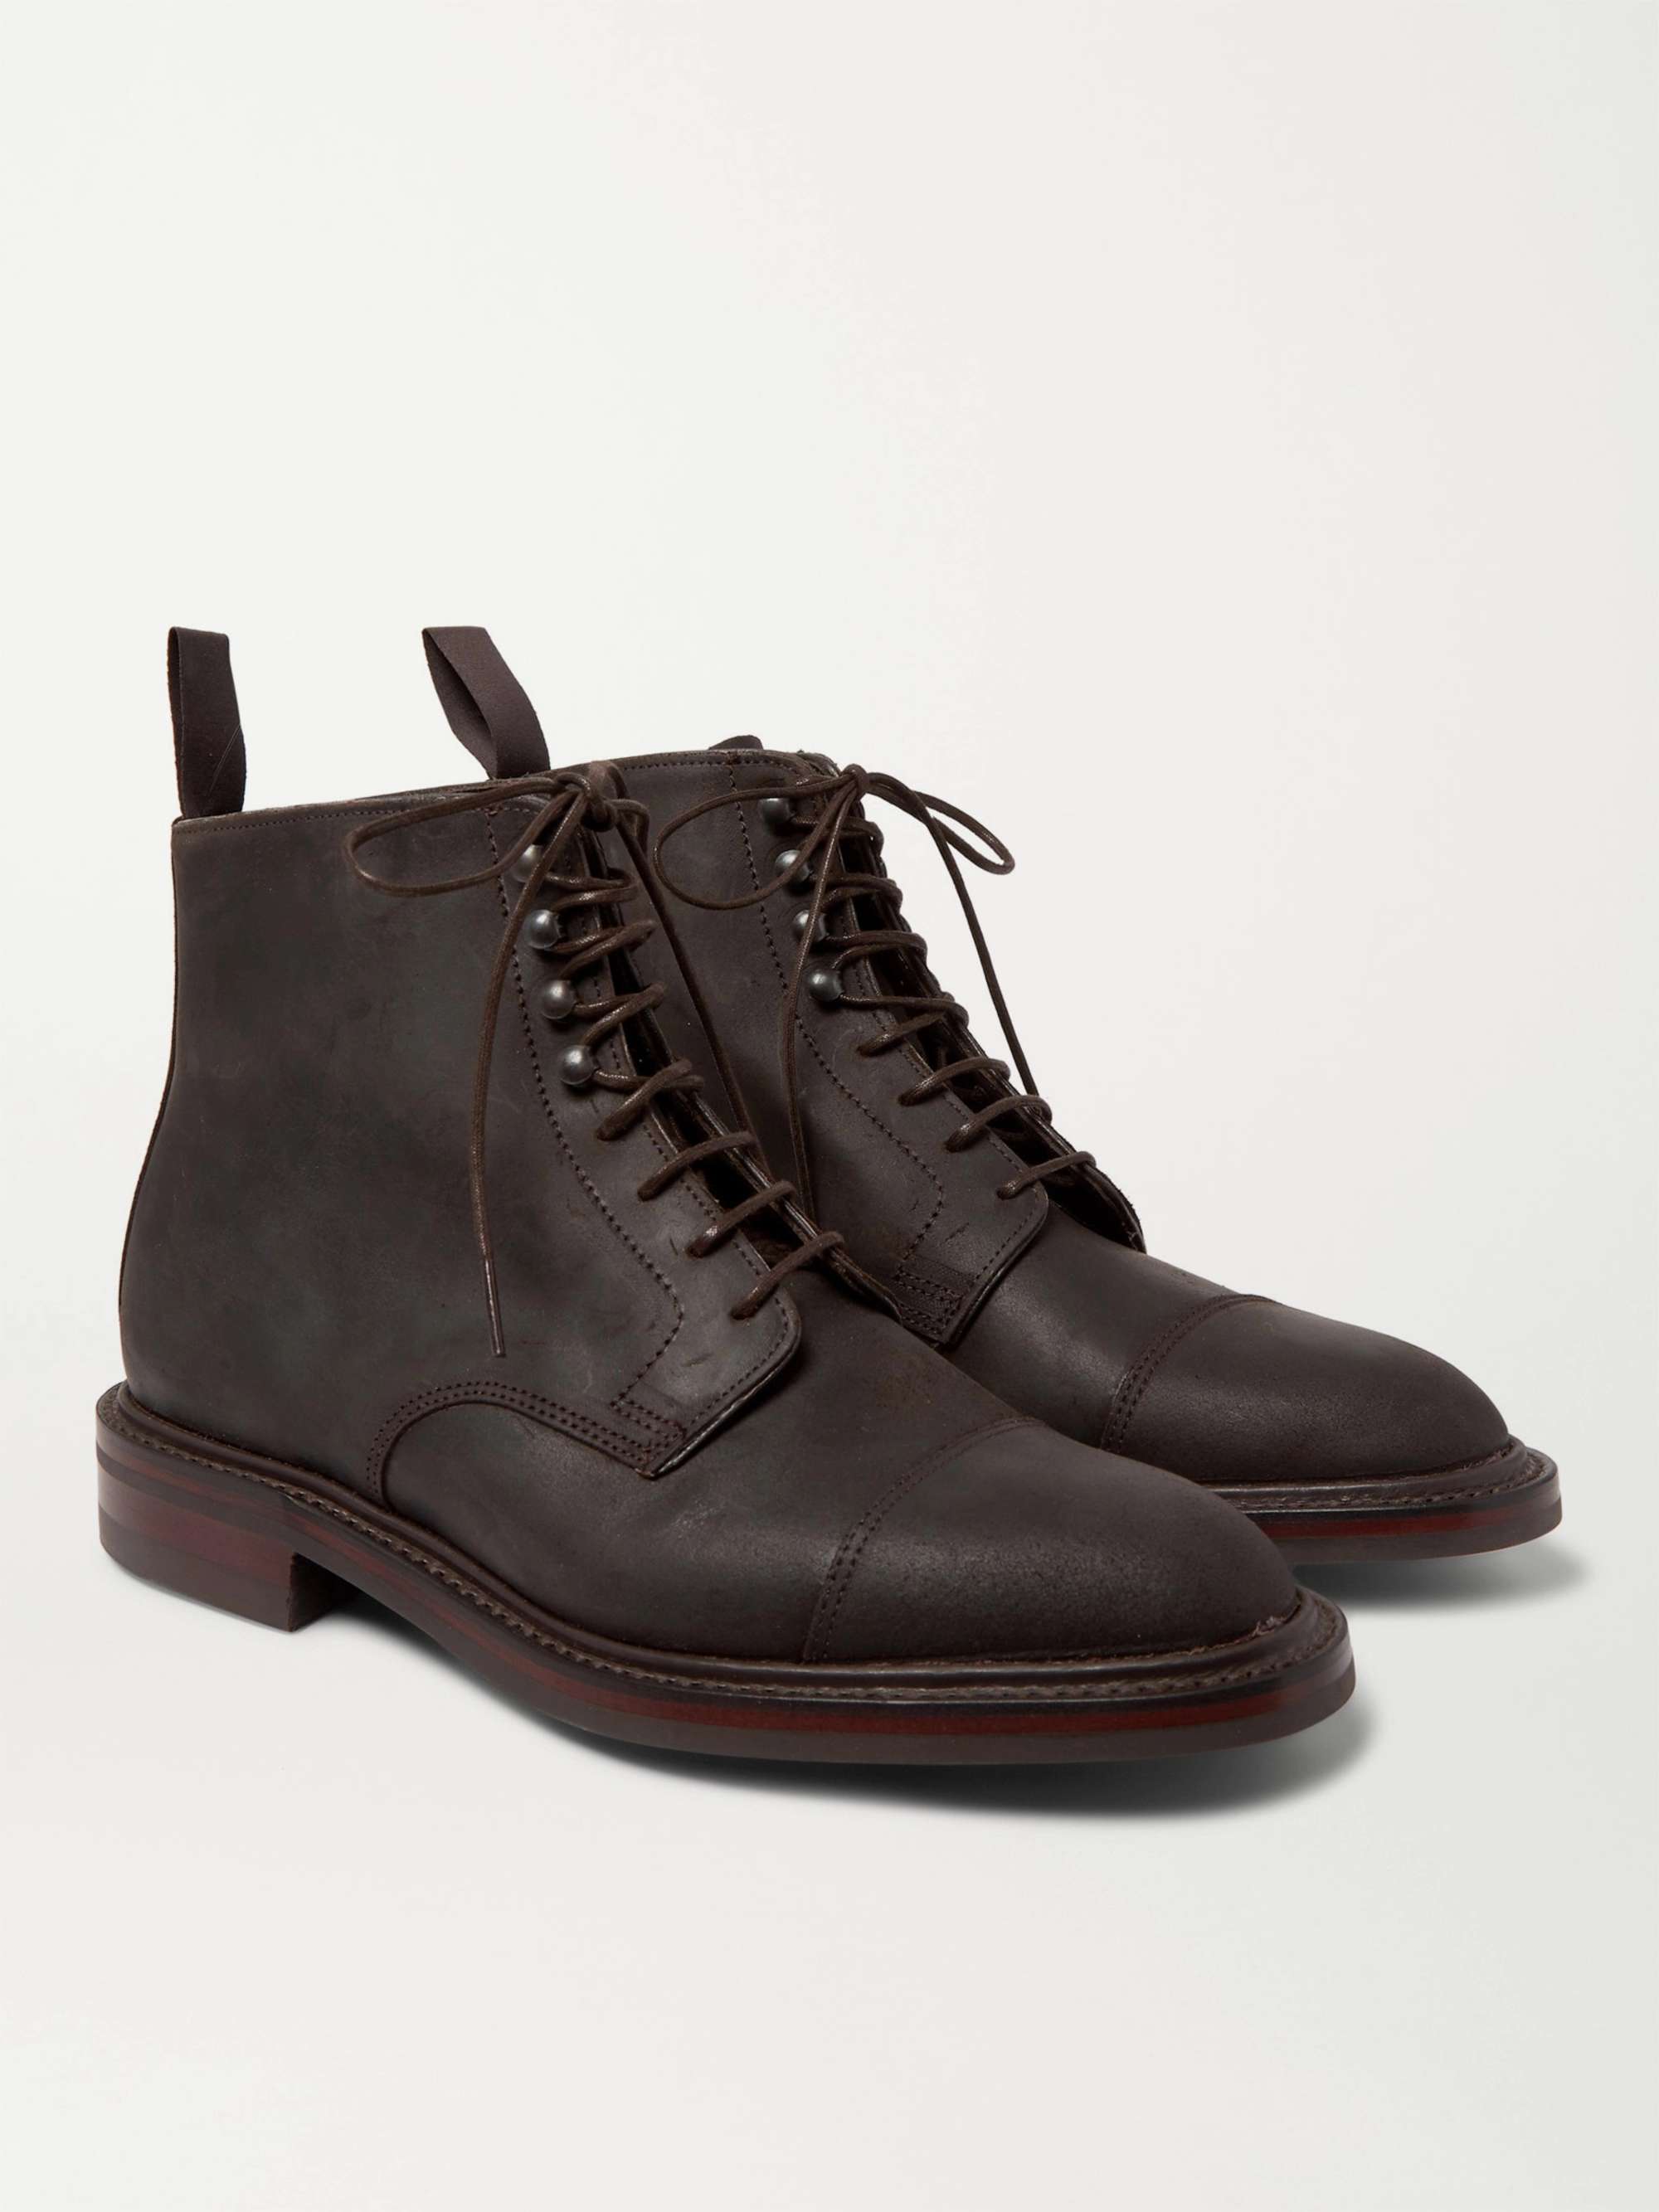 KINGSMAN + George Cleverley Taron Cap-Toe Roughout Leather Boots